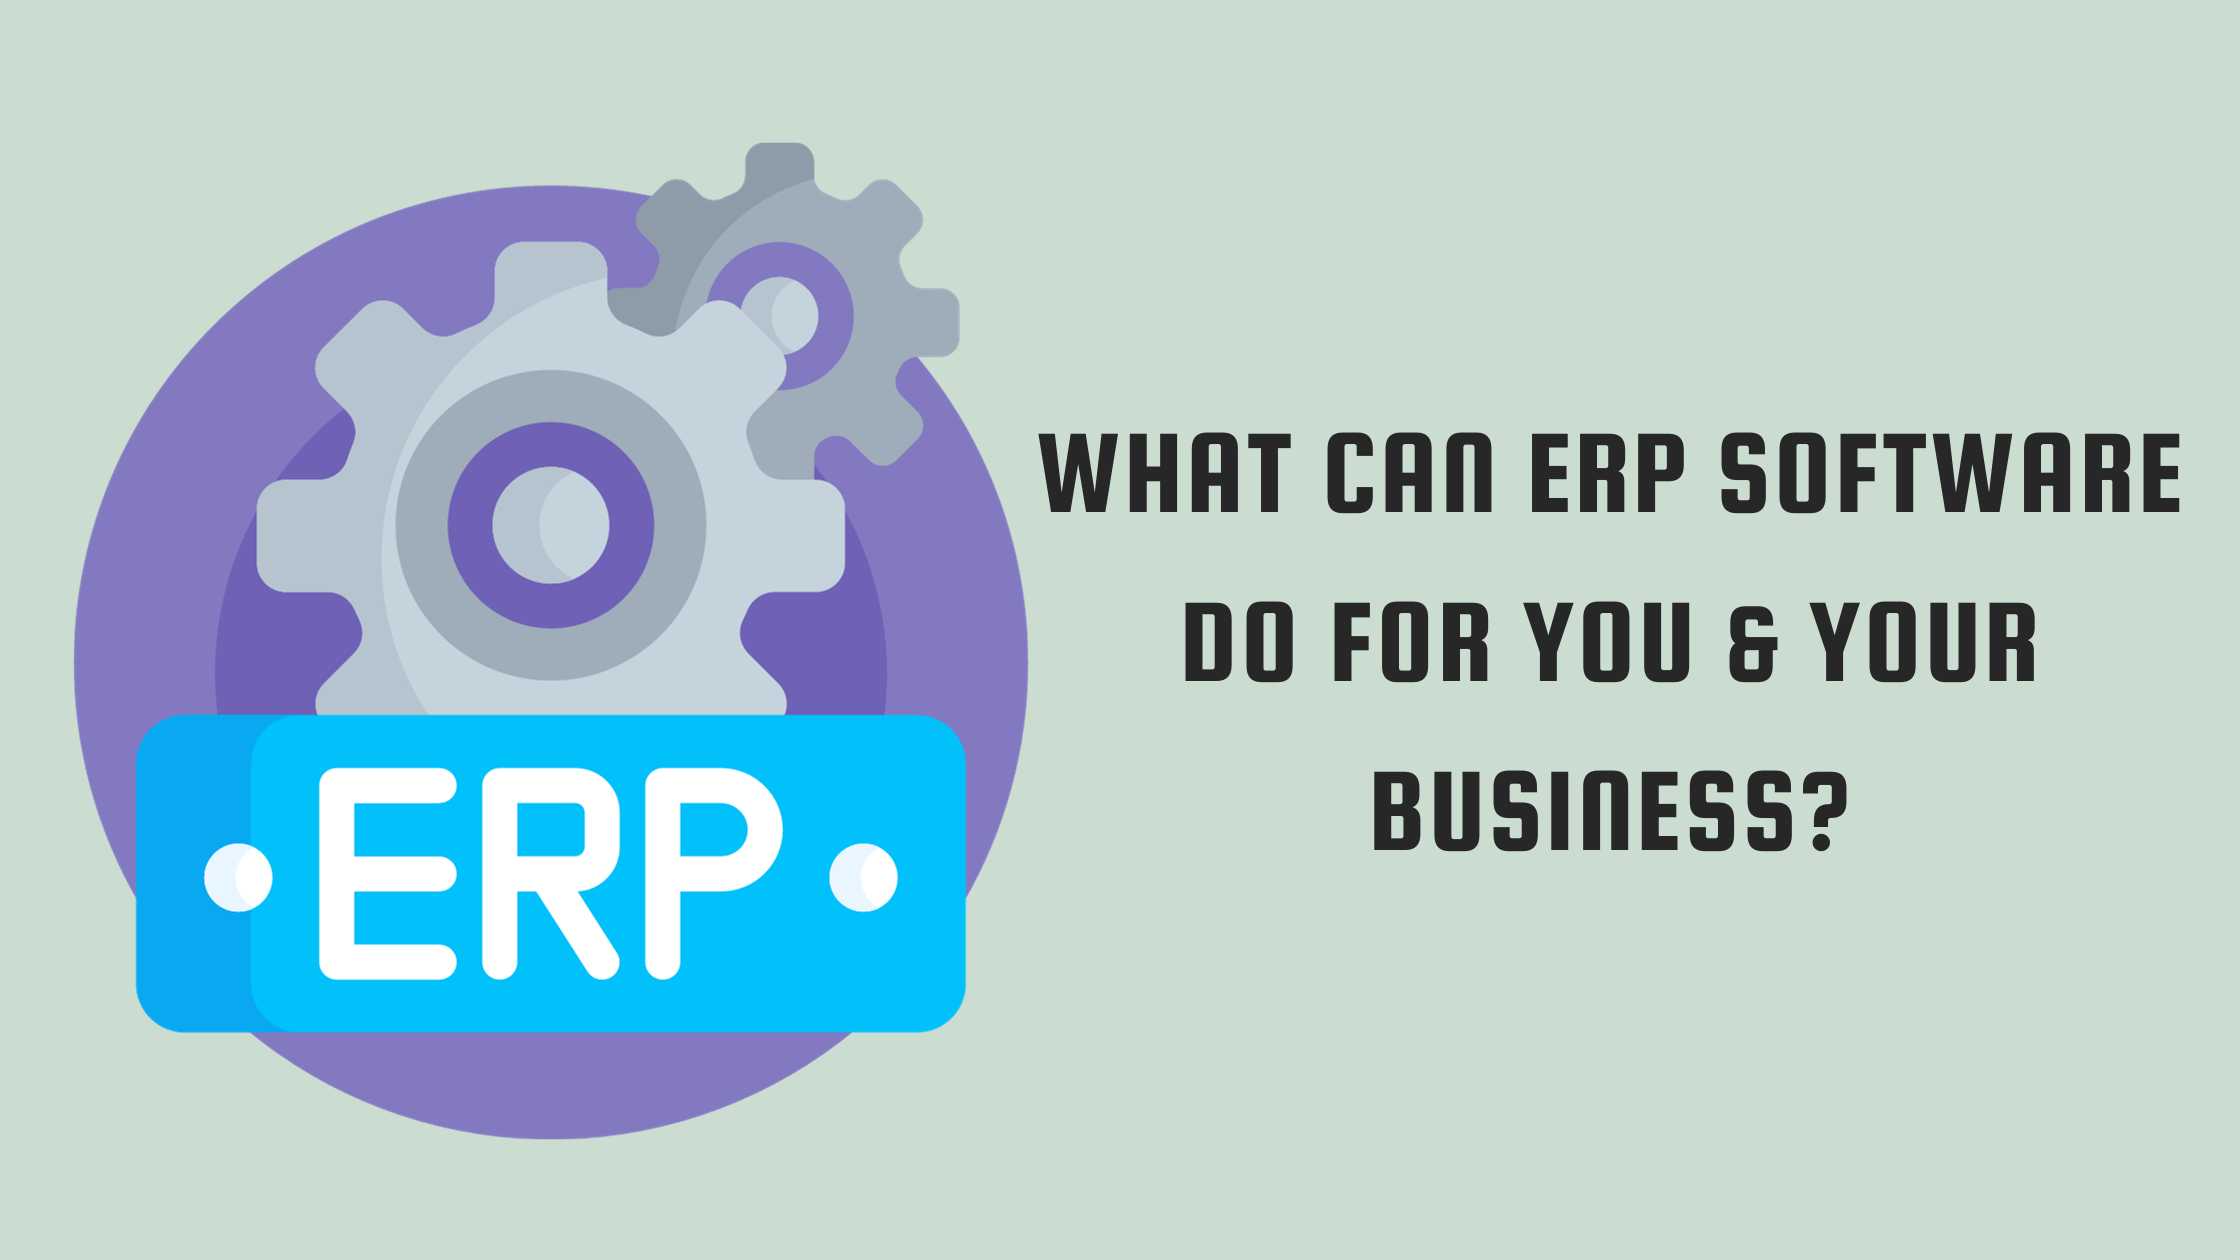 What Can ERP Software Do for You & Your Business?